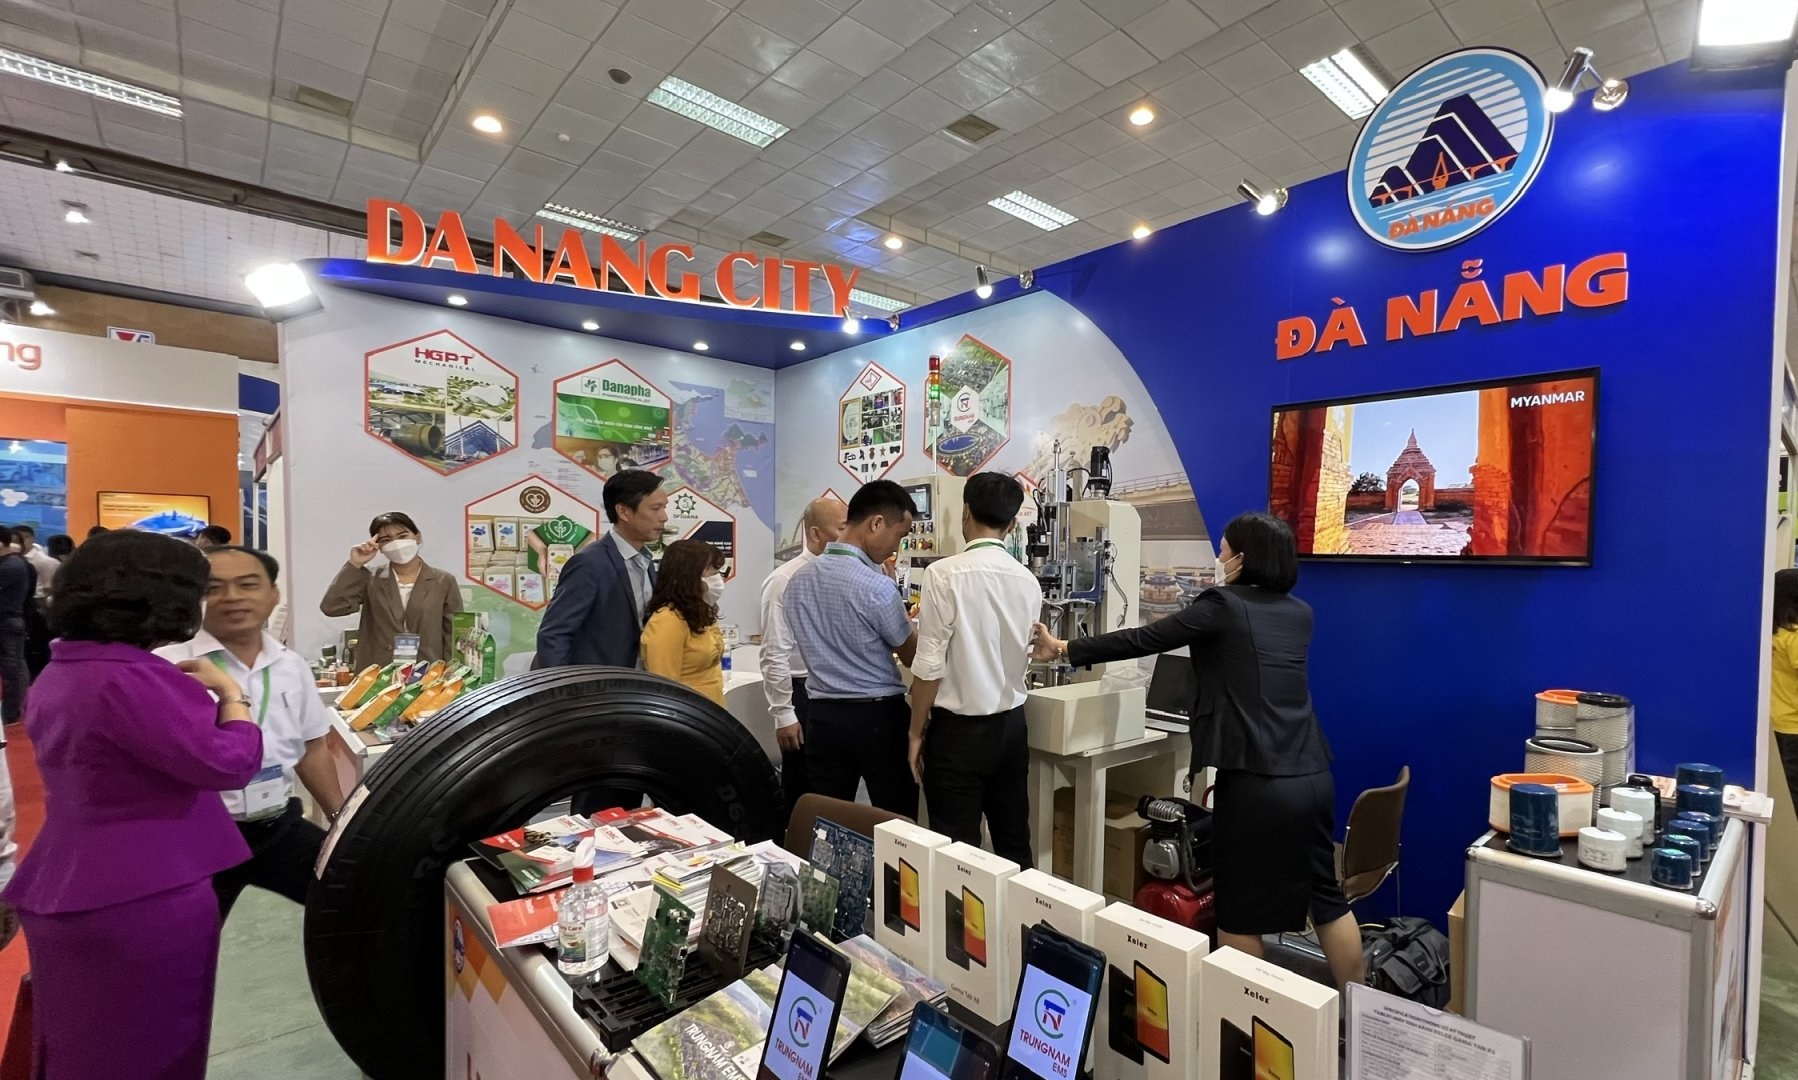 DANAPHA IN COLLABORATION WITH DANANG DEPARTMENT OF INDUSTRY AND TRADE PARTICIPATING IN VIETNAM EXPO 2022